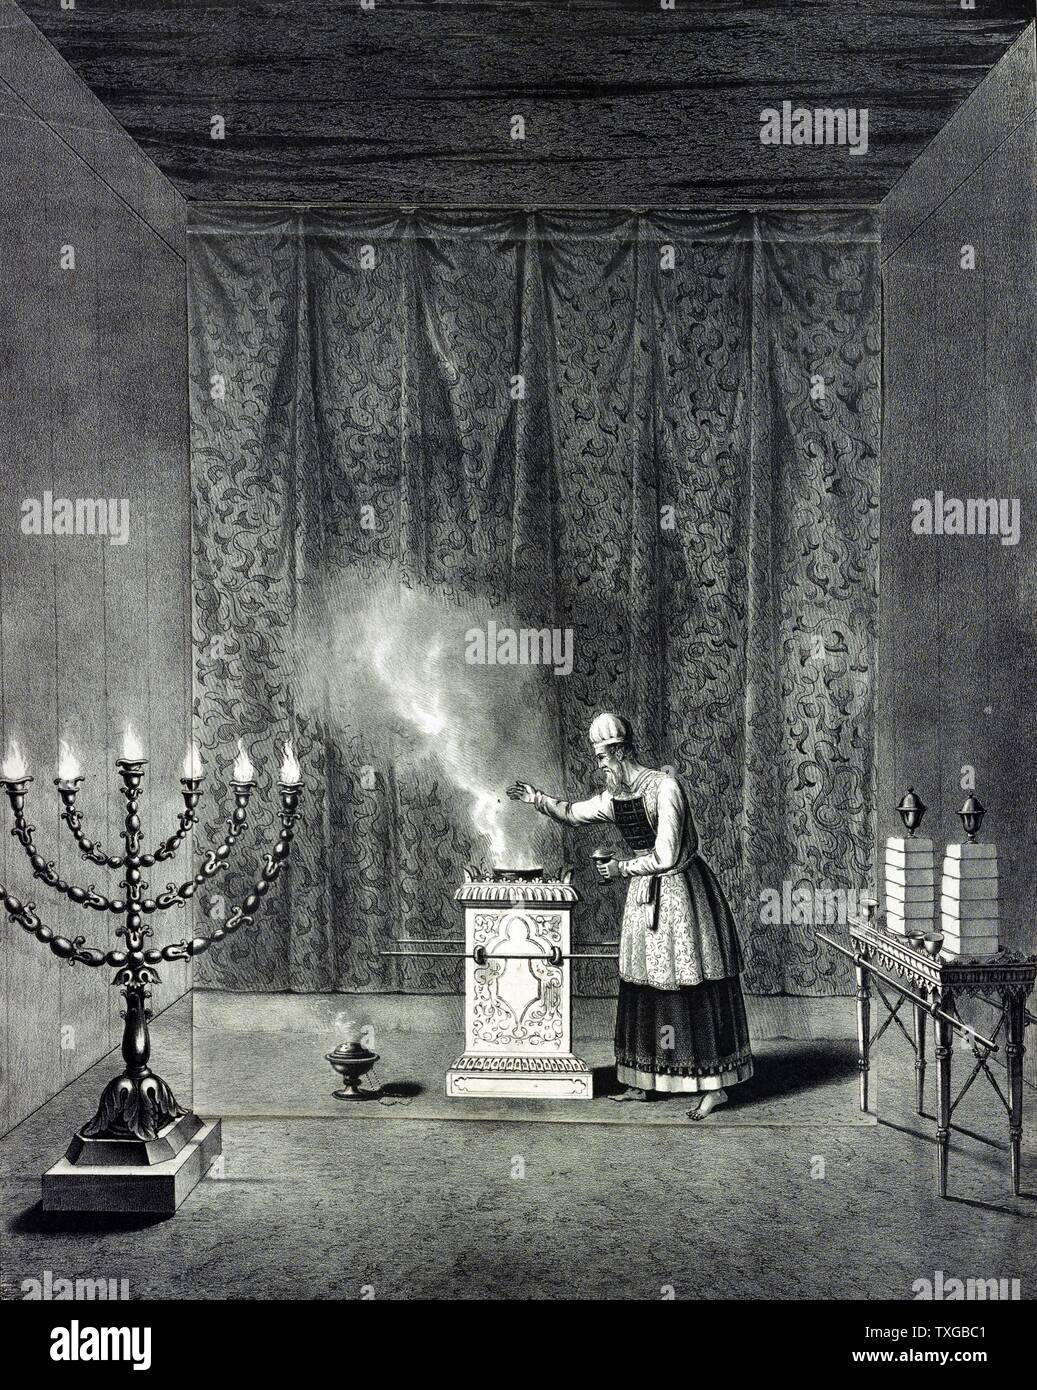 The holy place. Print shows, at center, a priest putting incense into a censer on The Altar of Incense, a large portable stand with carrying rods on two sides, a small censer sits on the floor nearby. On the left is The Golden Candlestick and on the right is The Table of Showbread. A large curtain hangs in the background. The central scene is a printed flap, which can be raised to display an underlying scene of the Holy of Holies with a priest kneeling to the left of the Ark of the Covenant. Stock Photo